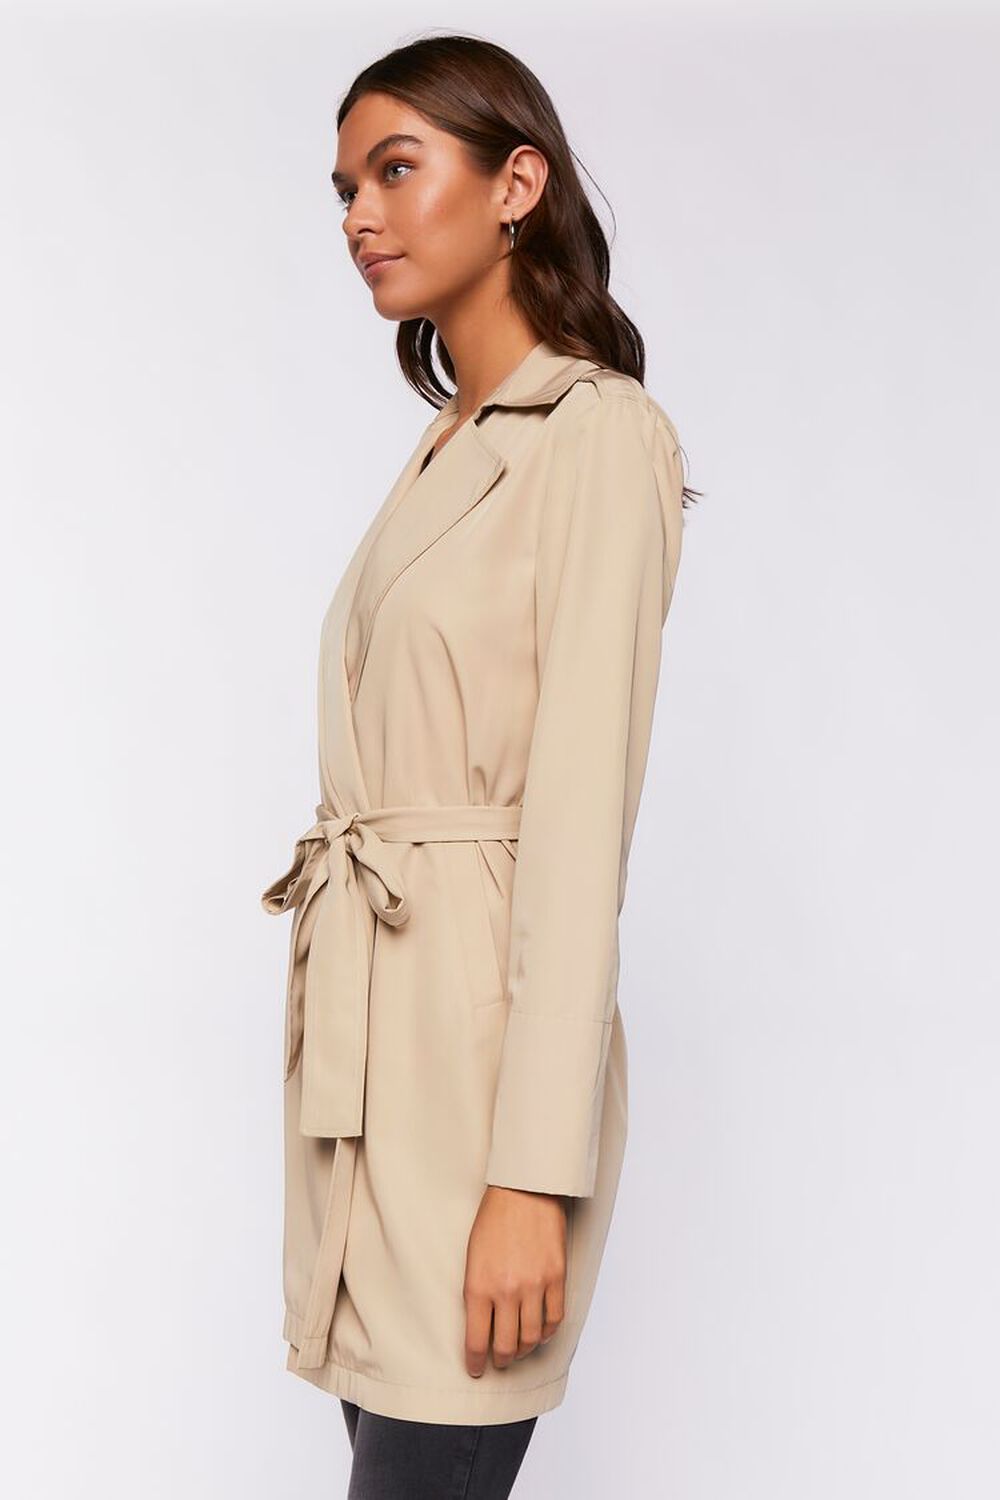 TAUPE Belted Trench Jacket, image 2